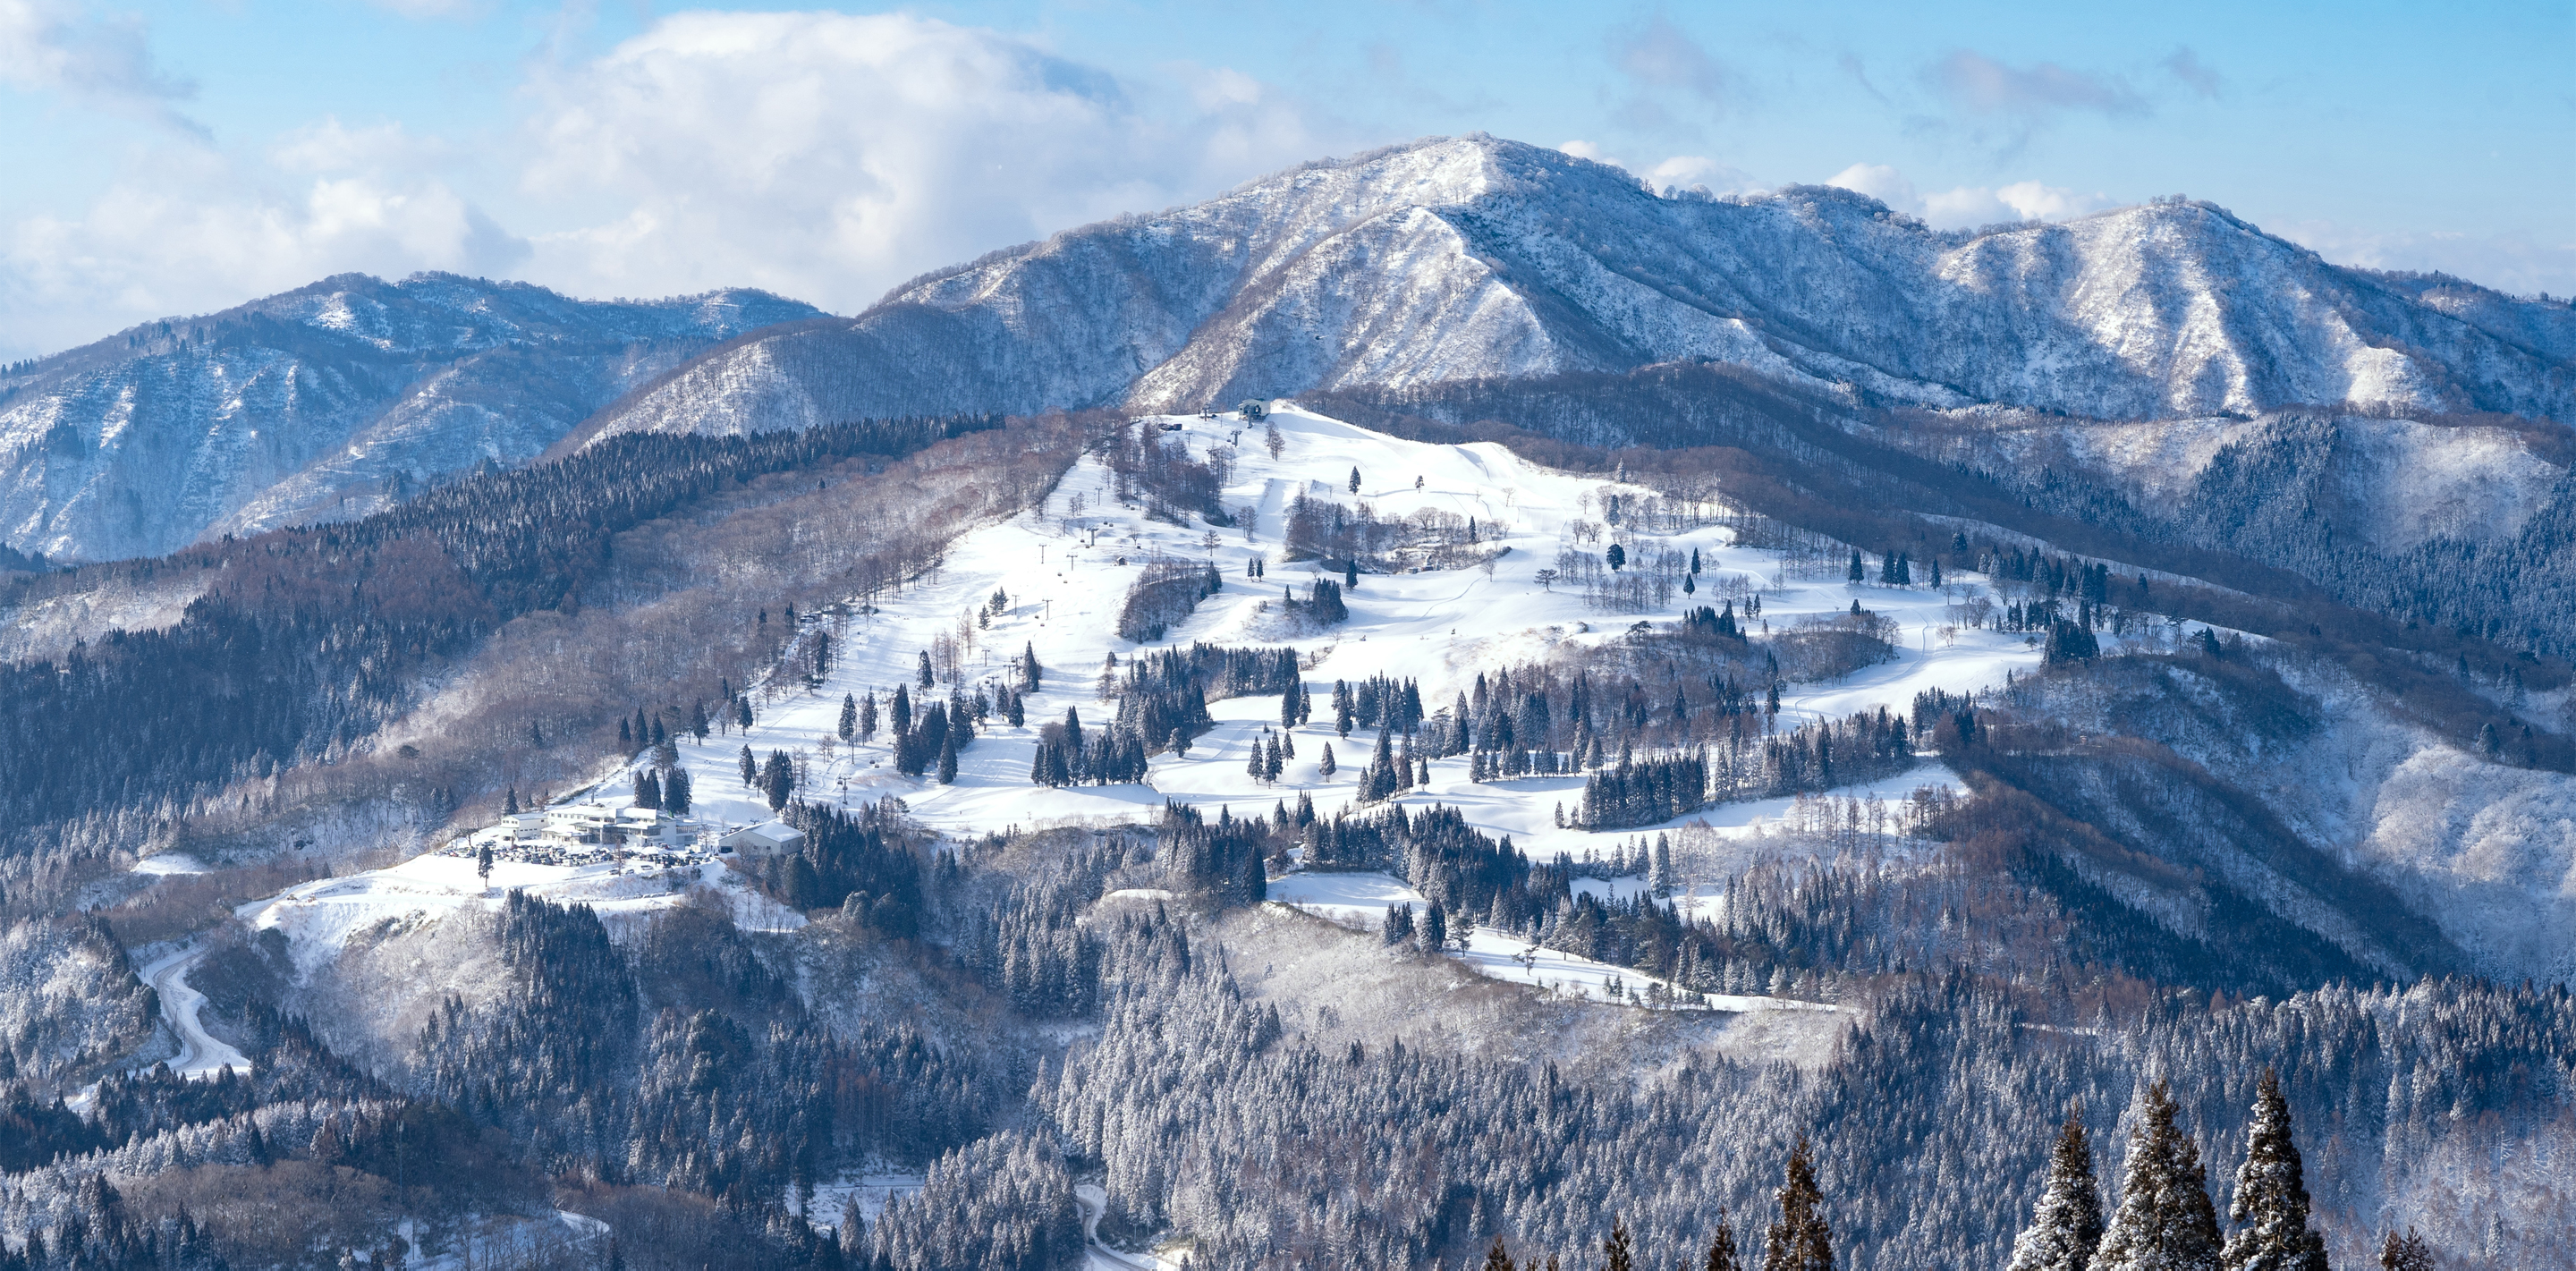 Largest skiing resort in western Japan Have fun at this world of snow!